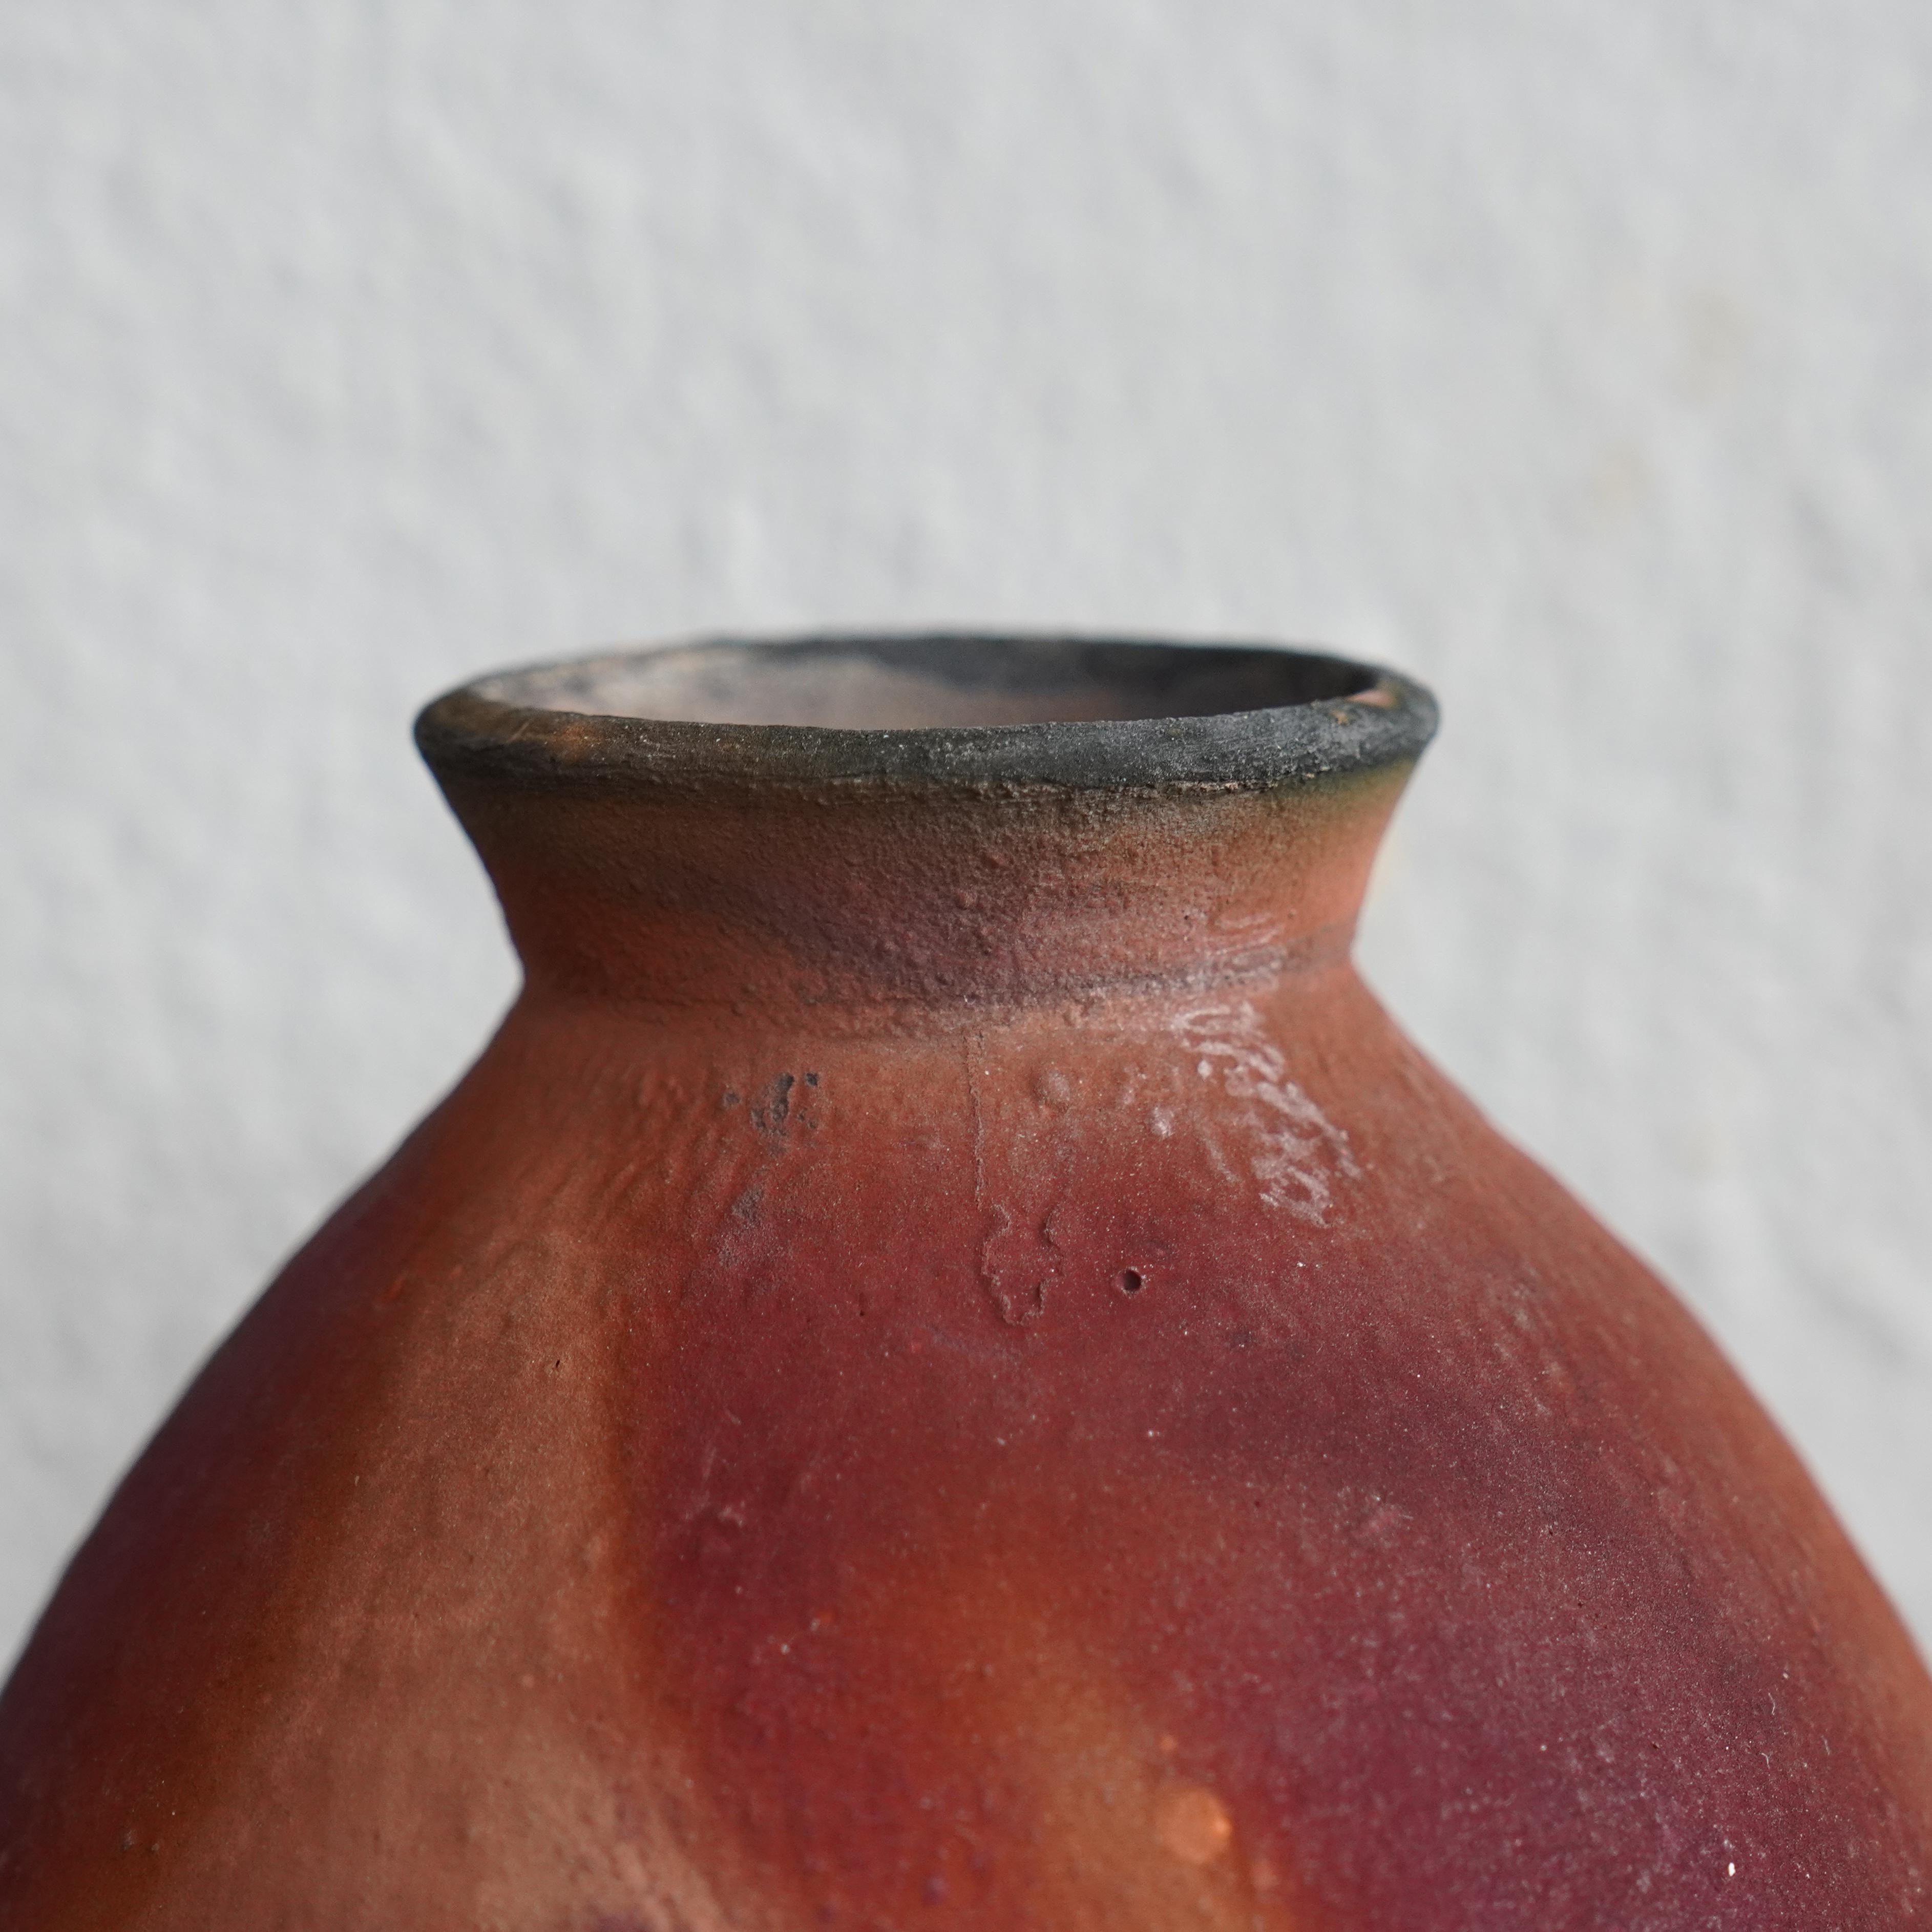 Yama ( 山 ) ~ (n) mountain

Our Yama vase has a wide bottom, tapered at the top with a narrow mouth – almost like a conical flask. Its shape also looks like a little mountain, hence its name.

This vase would be perfect for a rustic interior space